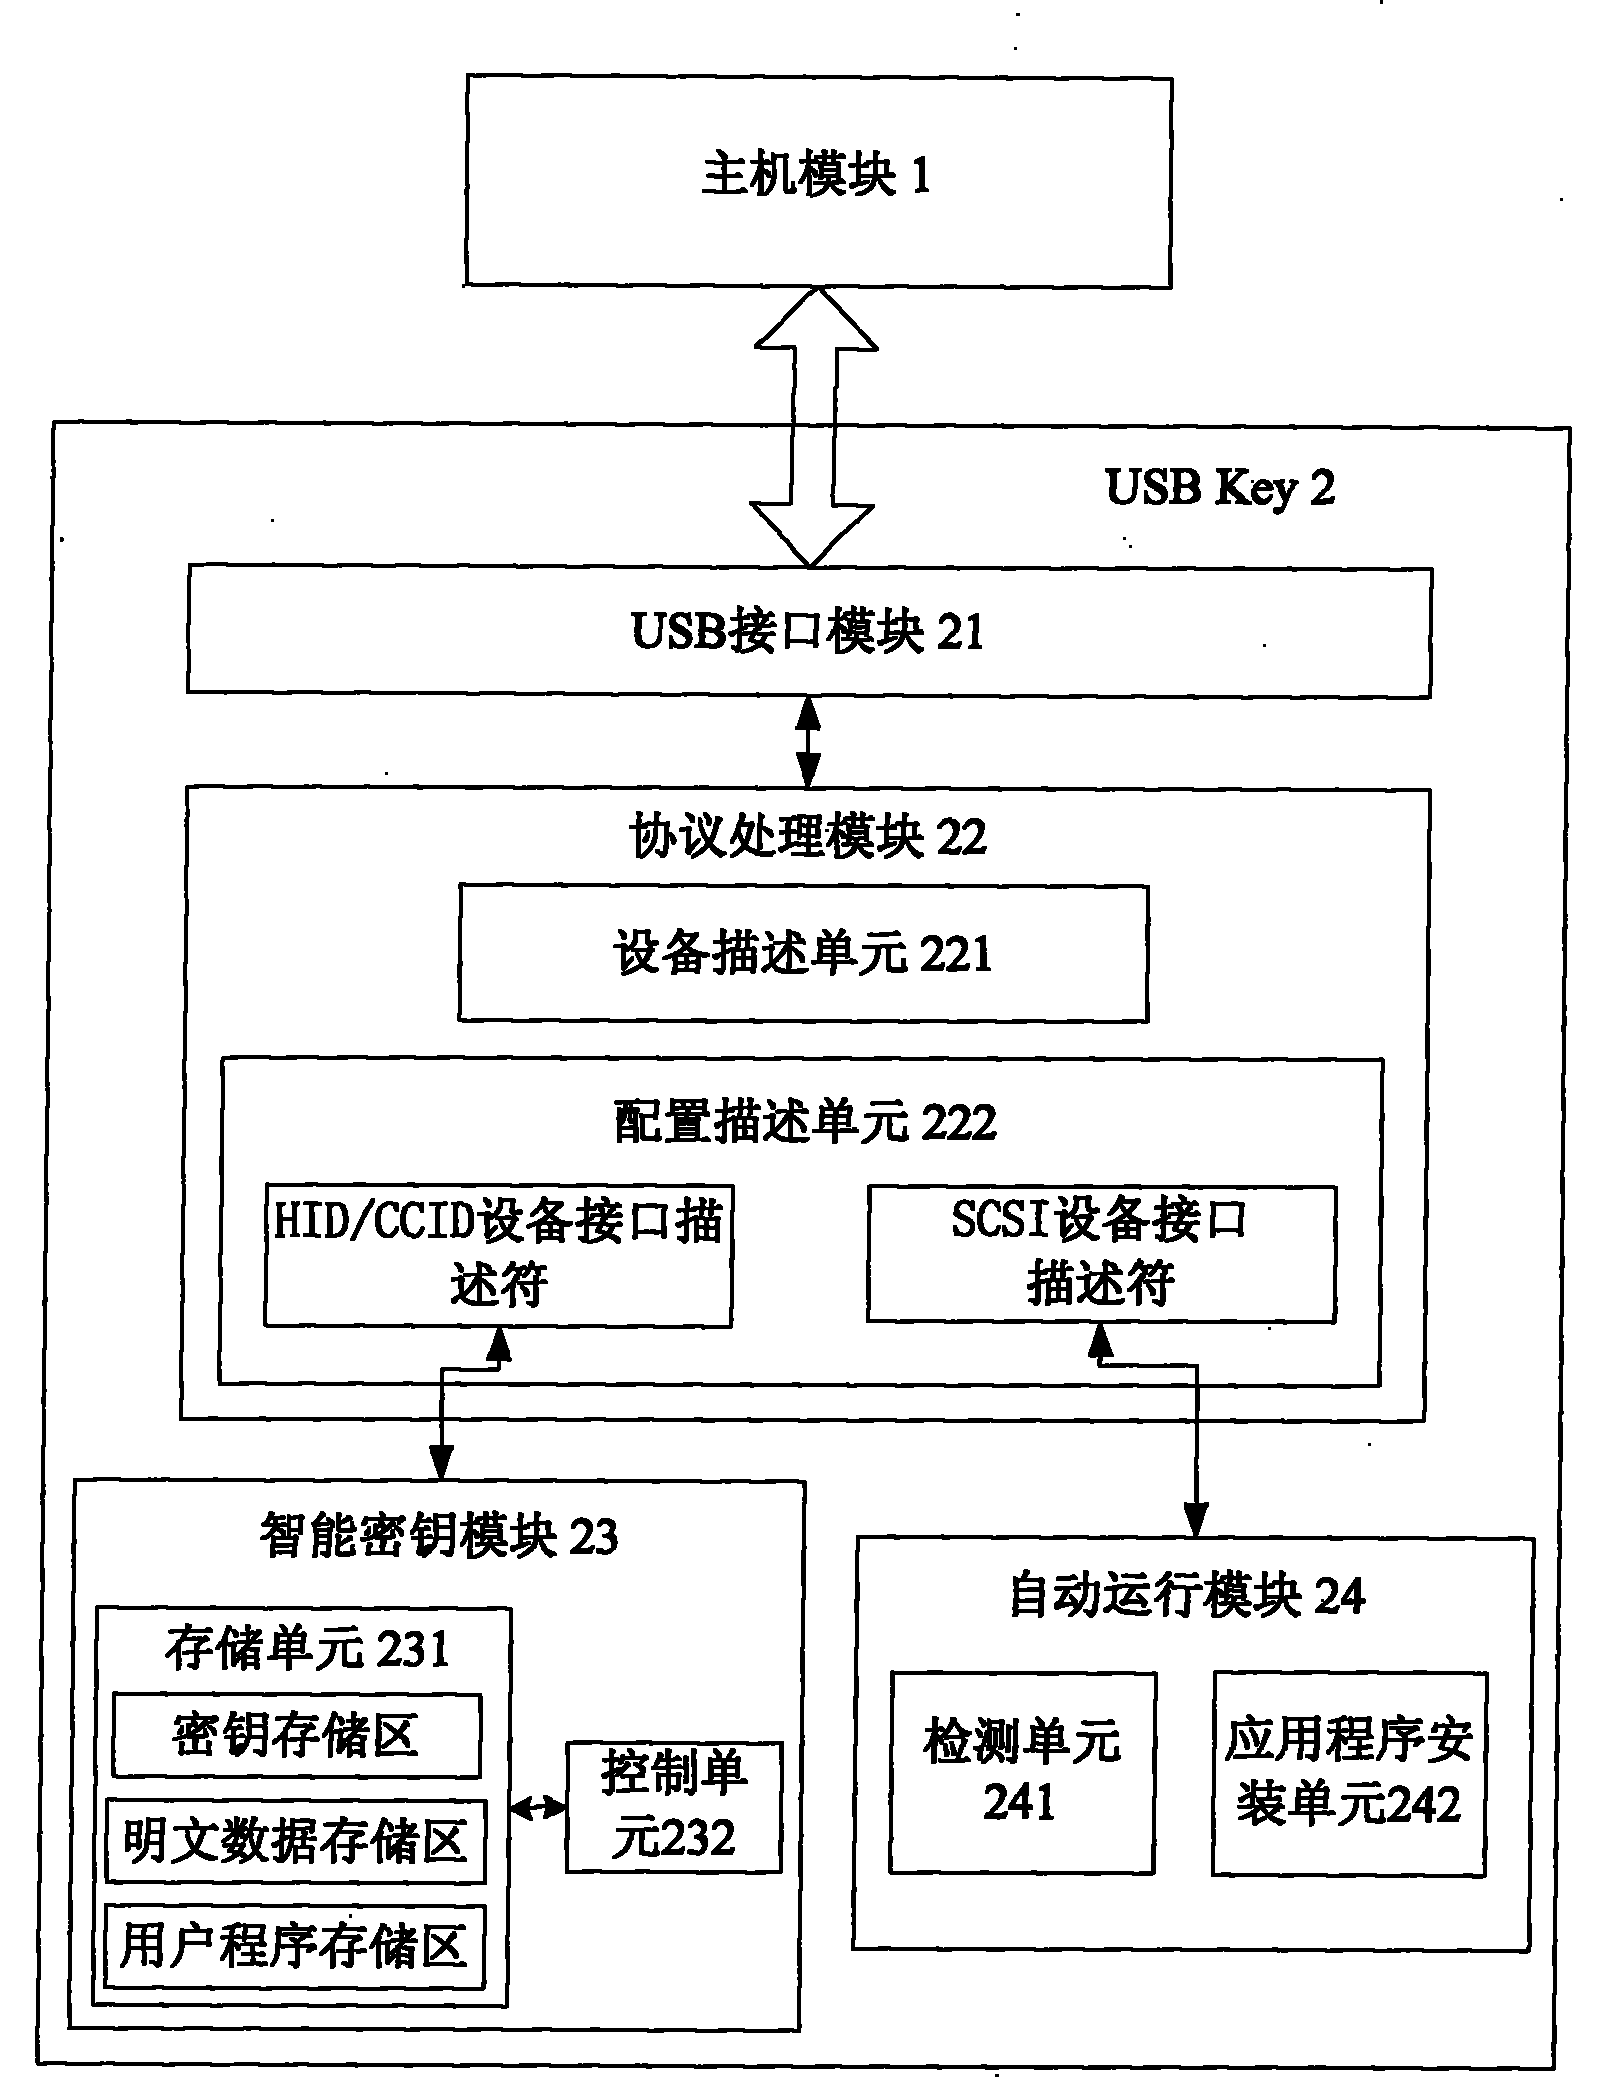 System and method for realizing multifunctional information security device